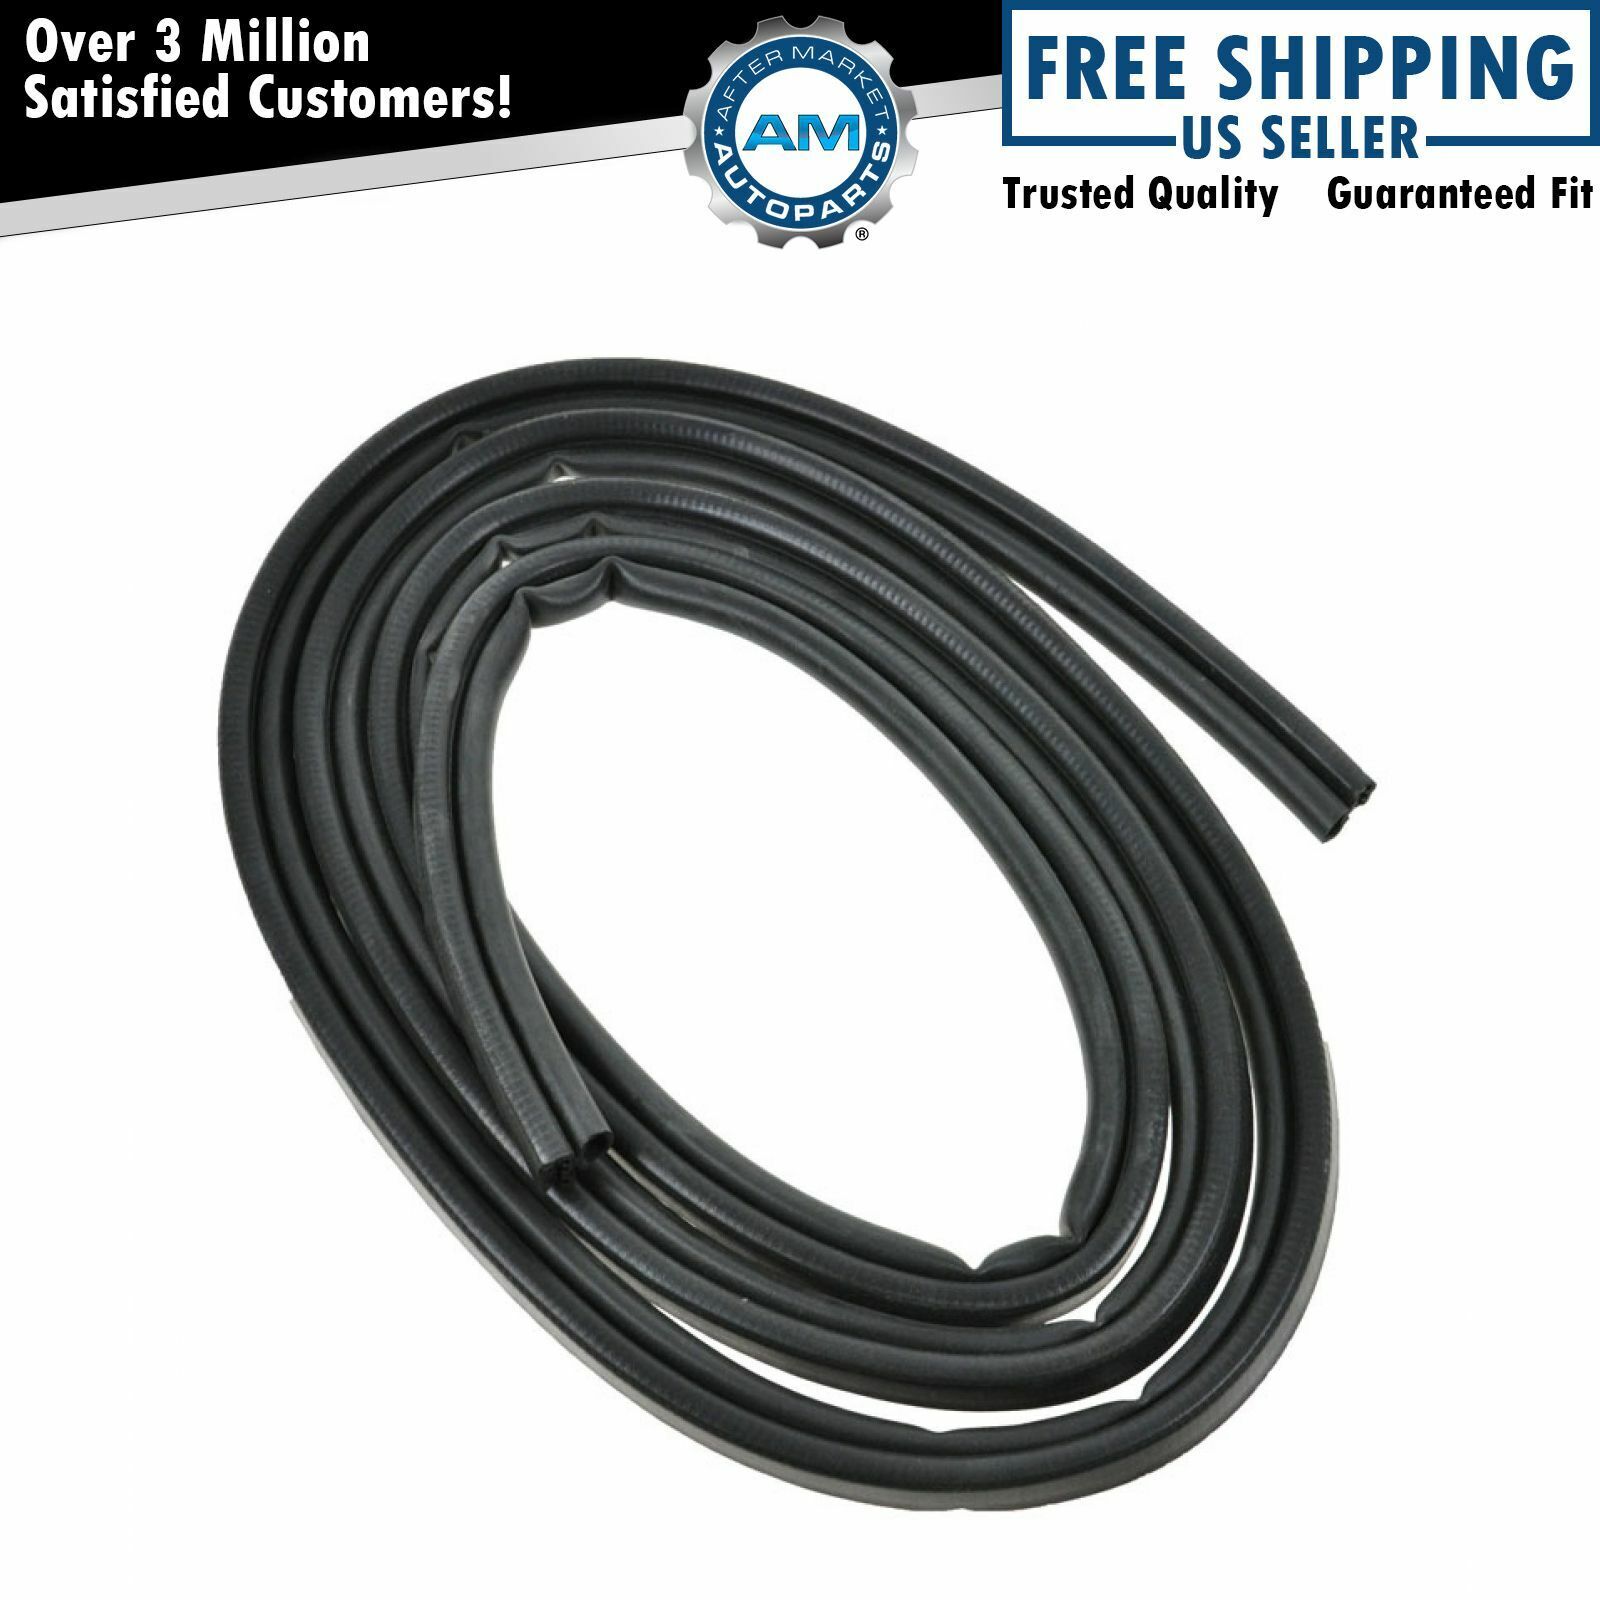 Door Weatherstrip Seal for Buick Cadillac Olds Chevy GMC Pickup Truck